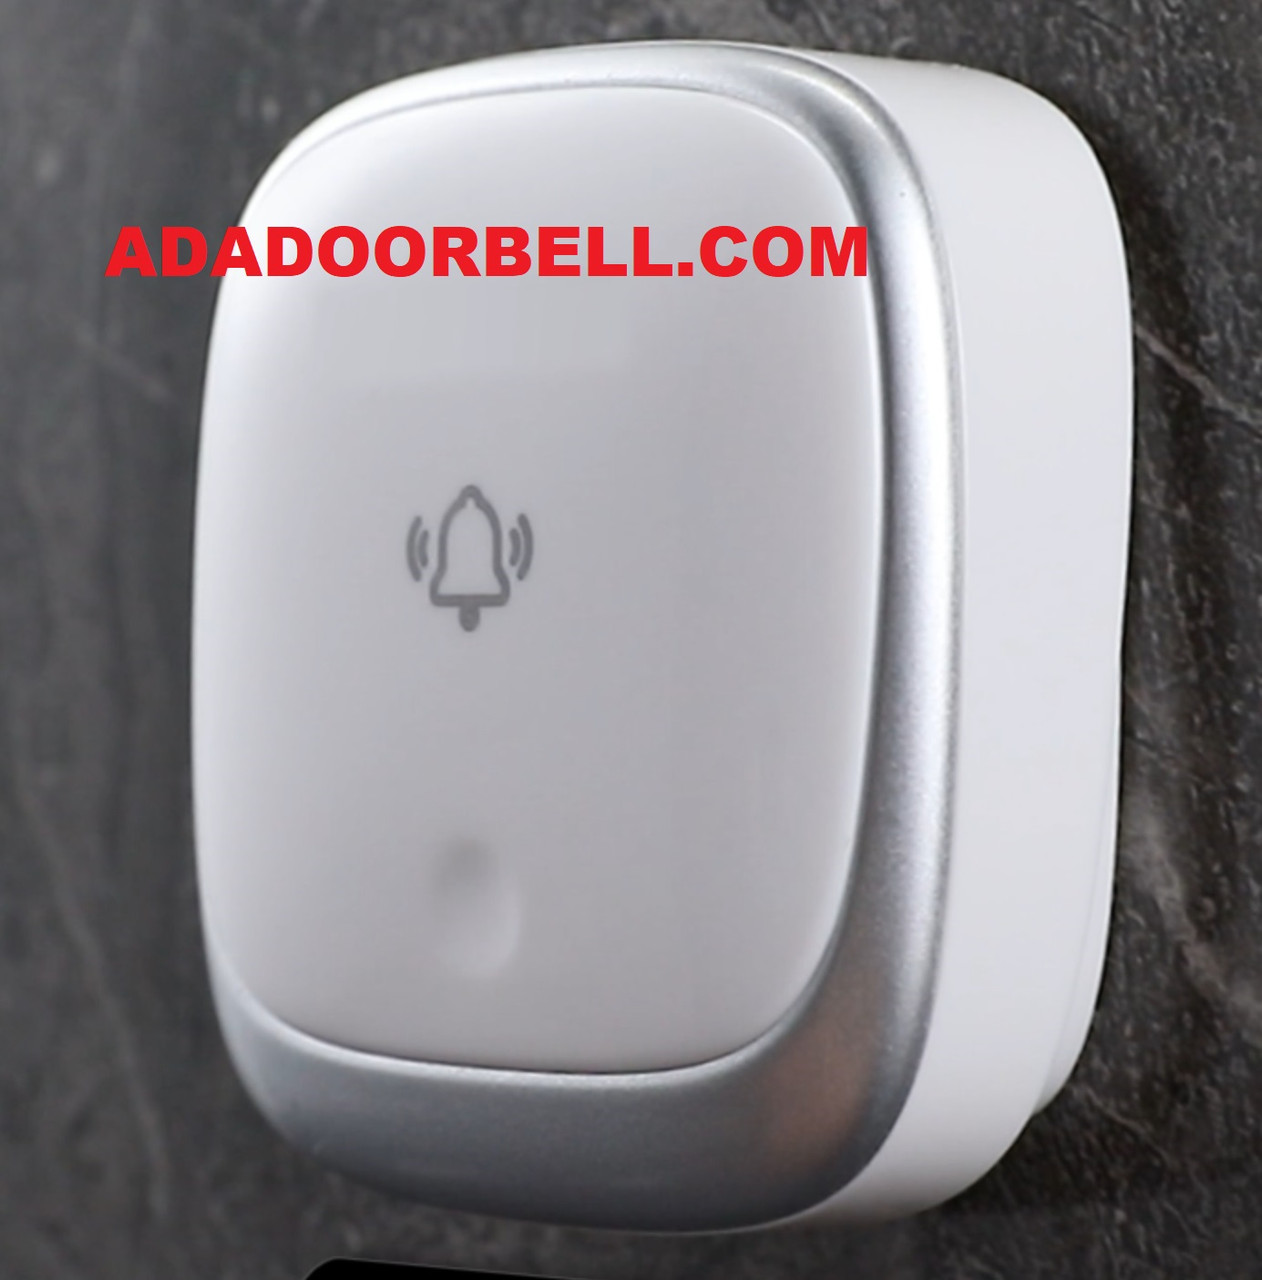 flare Seminary Menneskelige race Hearing Impaired DOORBELL-WITH Flashing Light